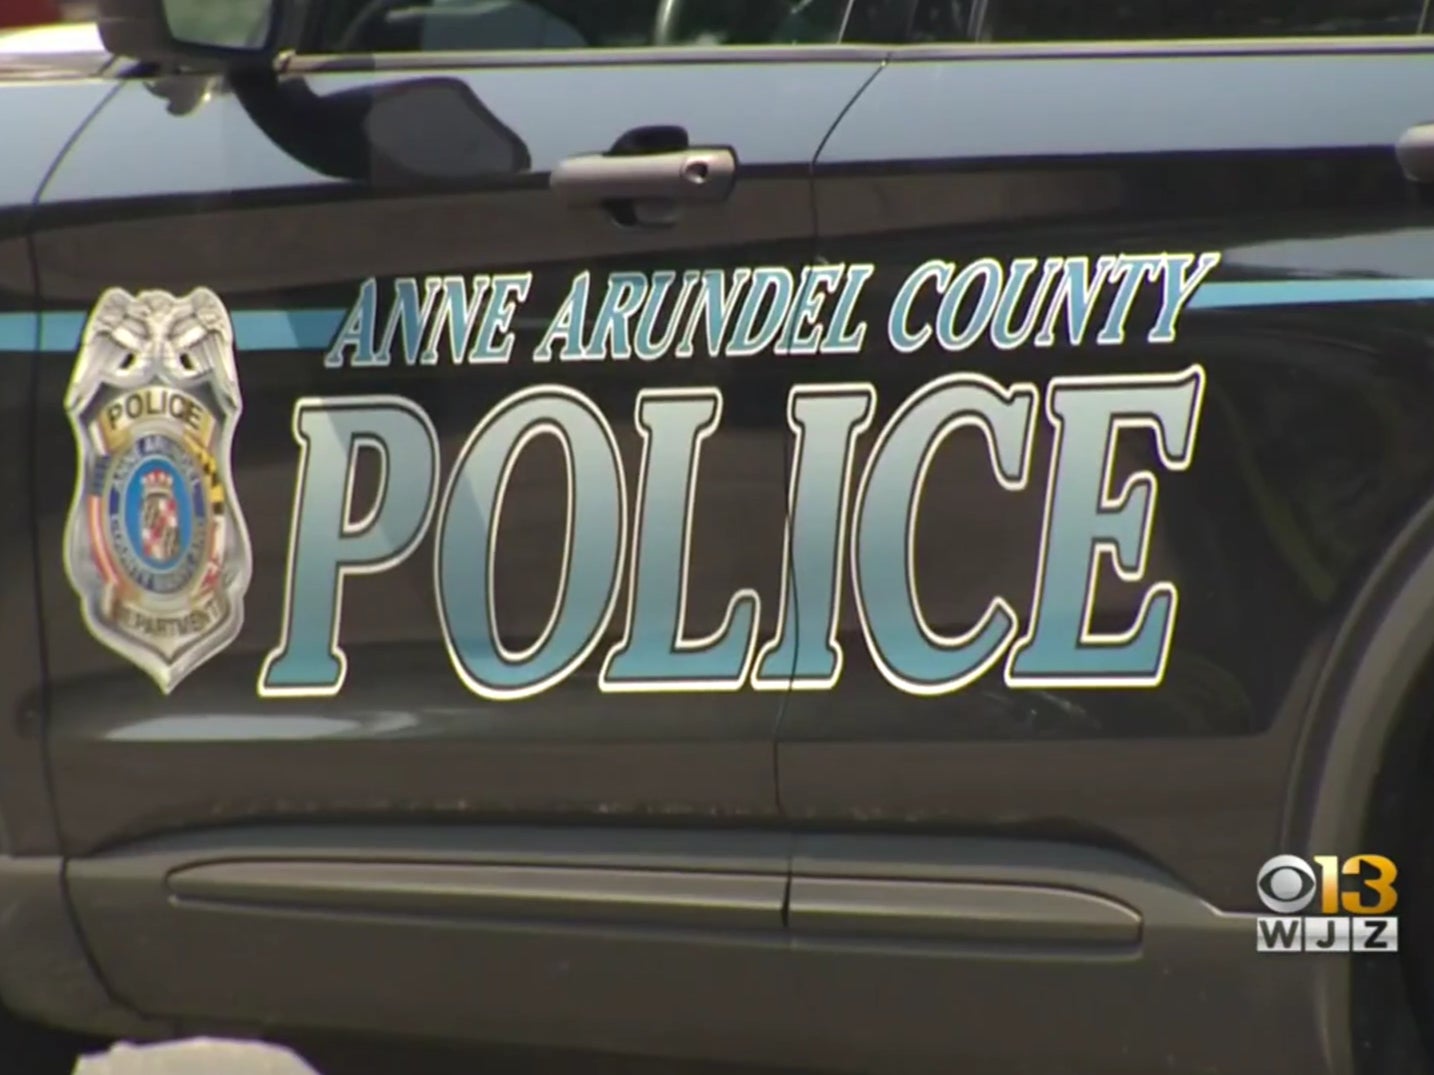 Police in Anne Arundel County, Maryland, arrested a Baltimore police officer on Tuesday